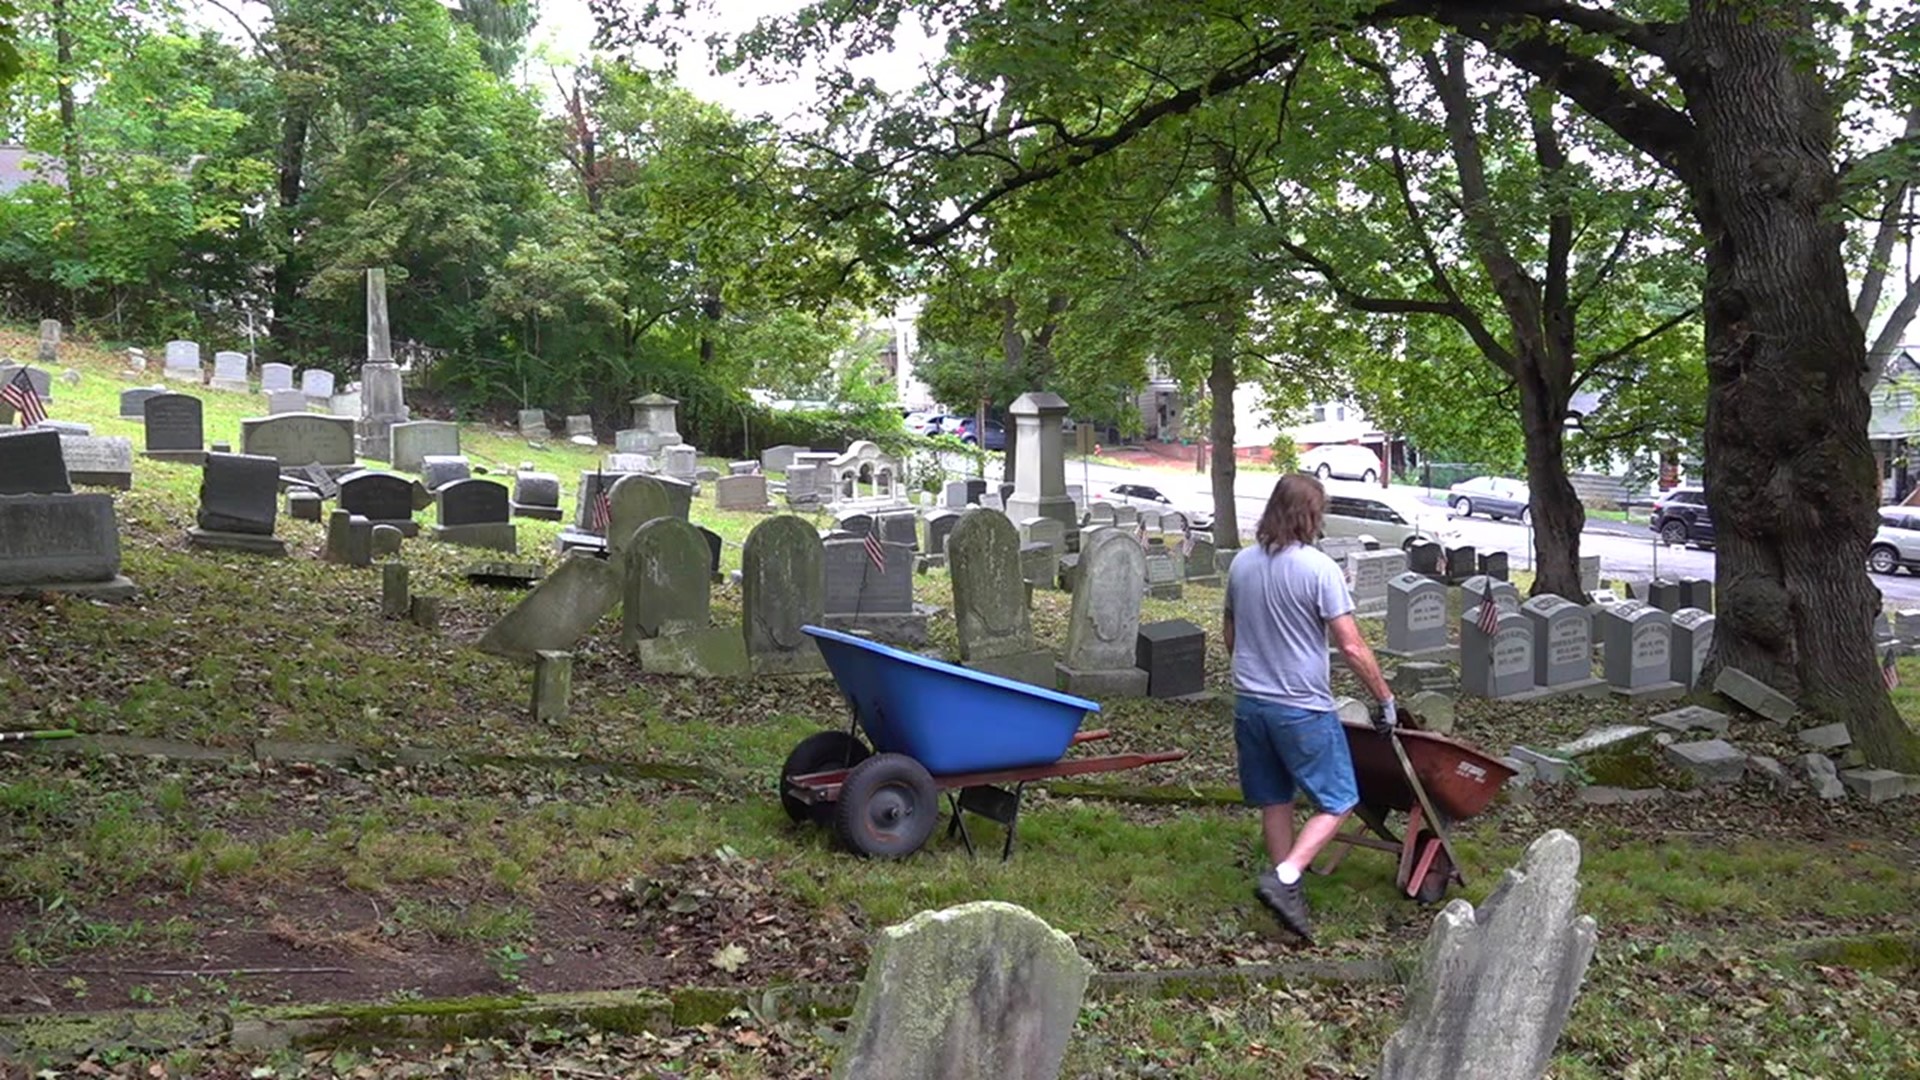 To spread awareness about National Recovery Month, a group in Pottsville dedicated their Labor Day to cleaning up a local cemetery